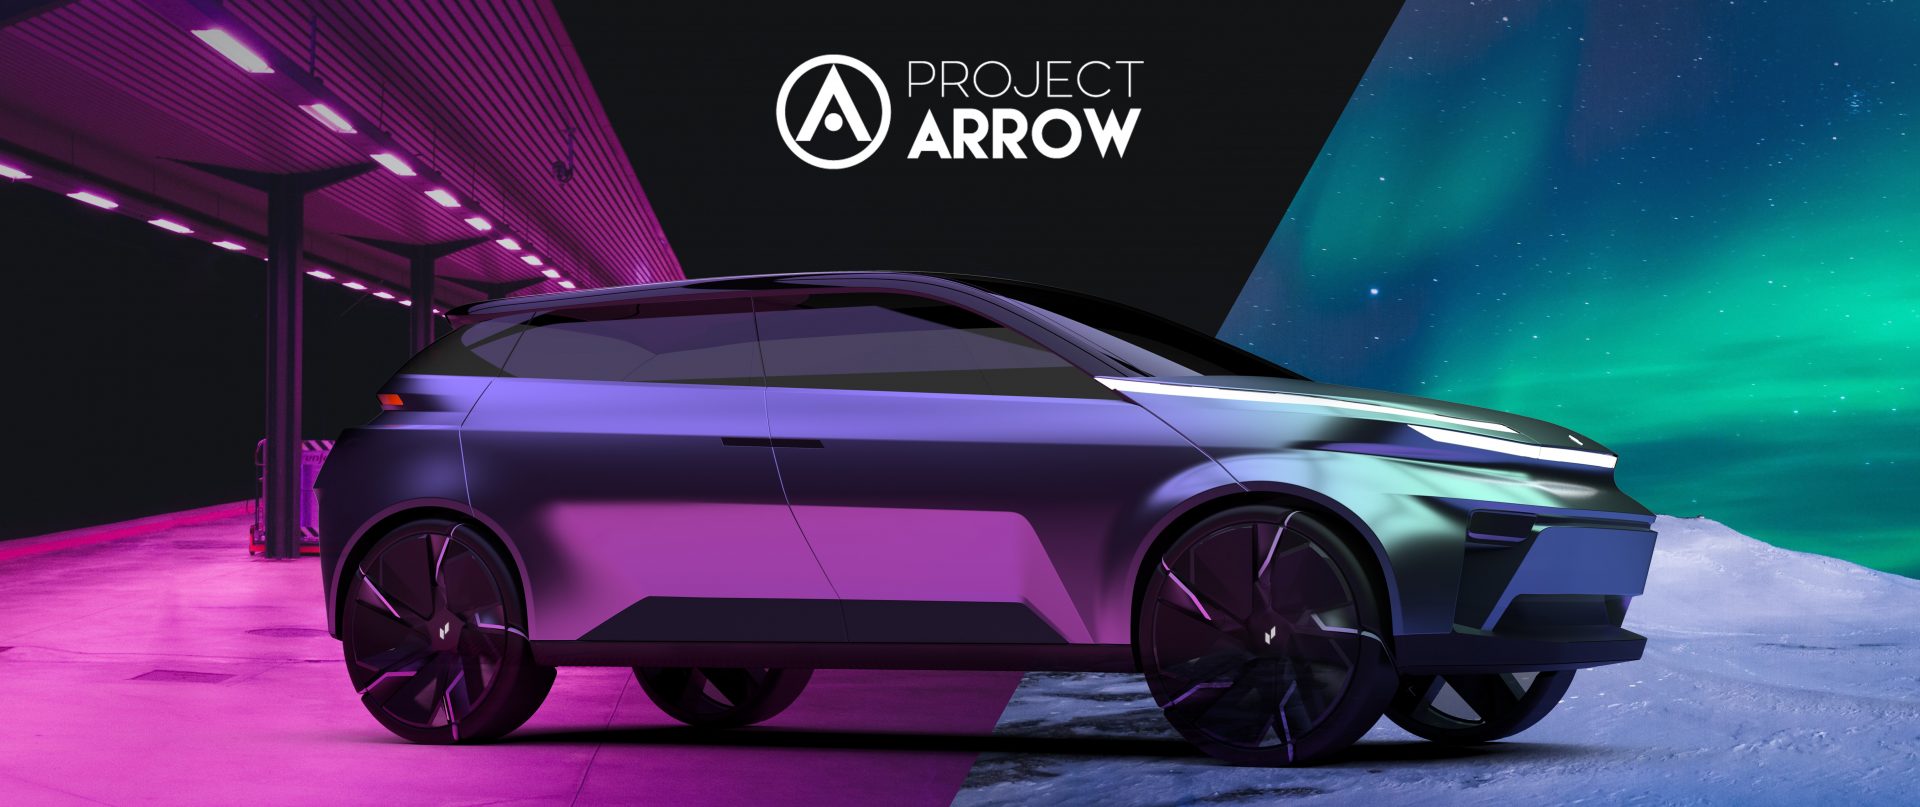 The Call of the Future: Project Arrow and the Winning Team